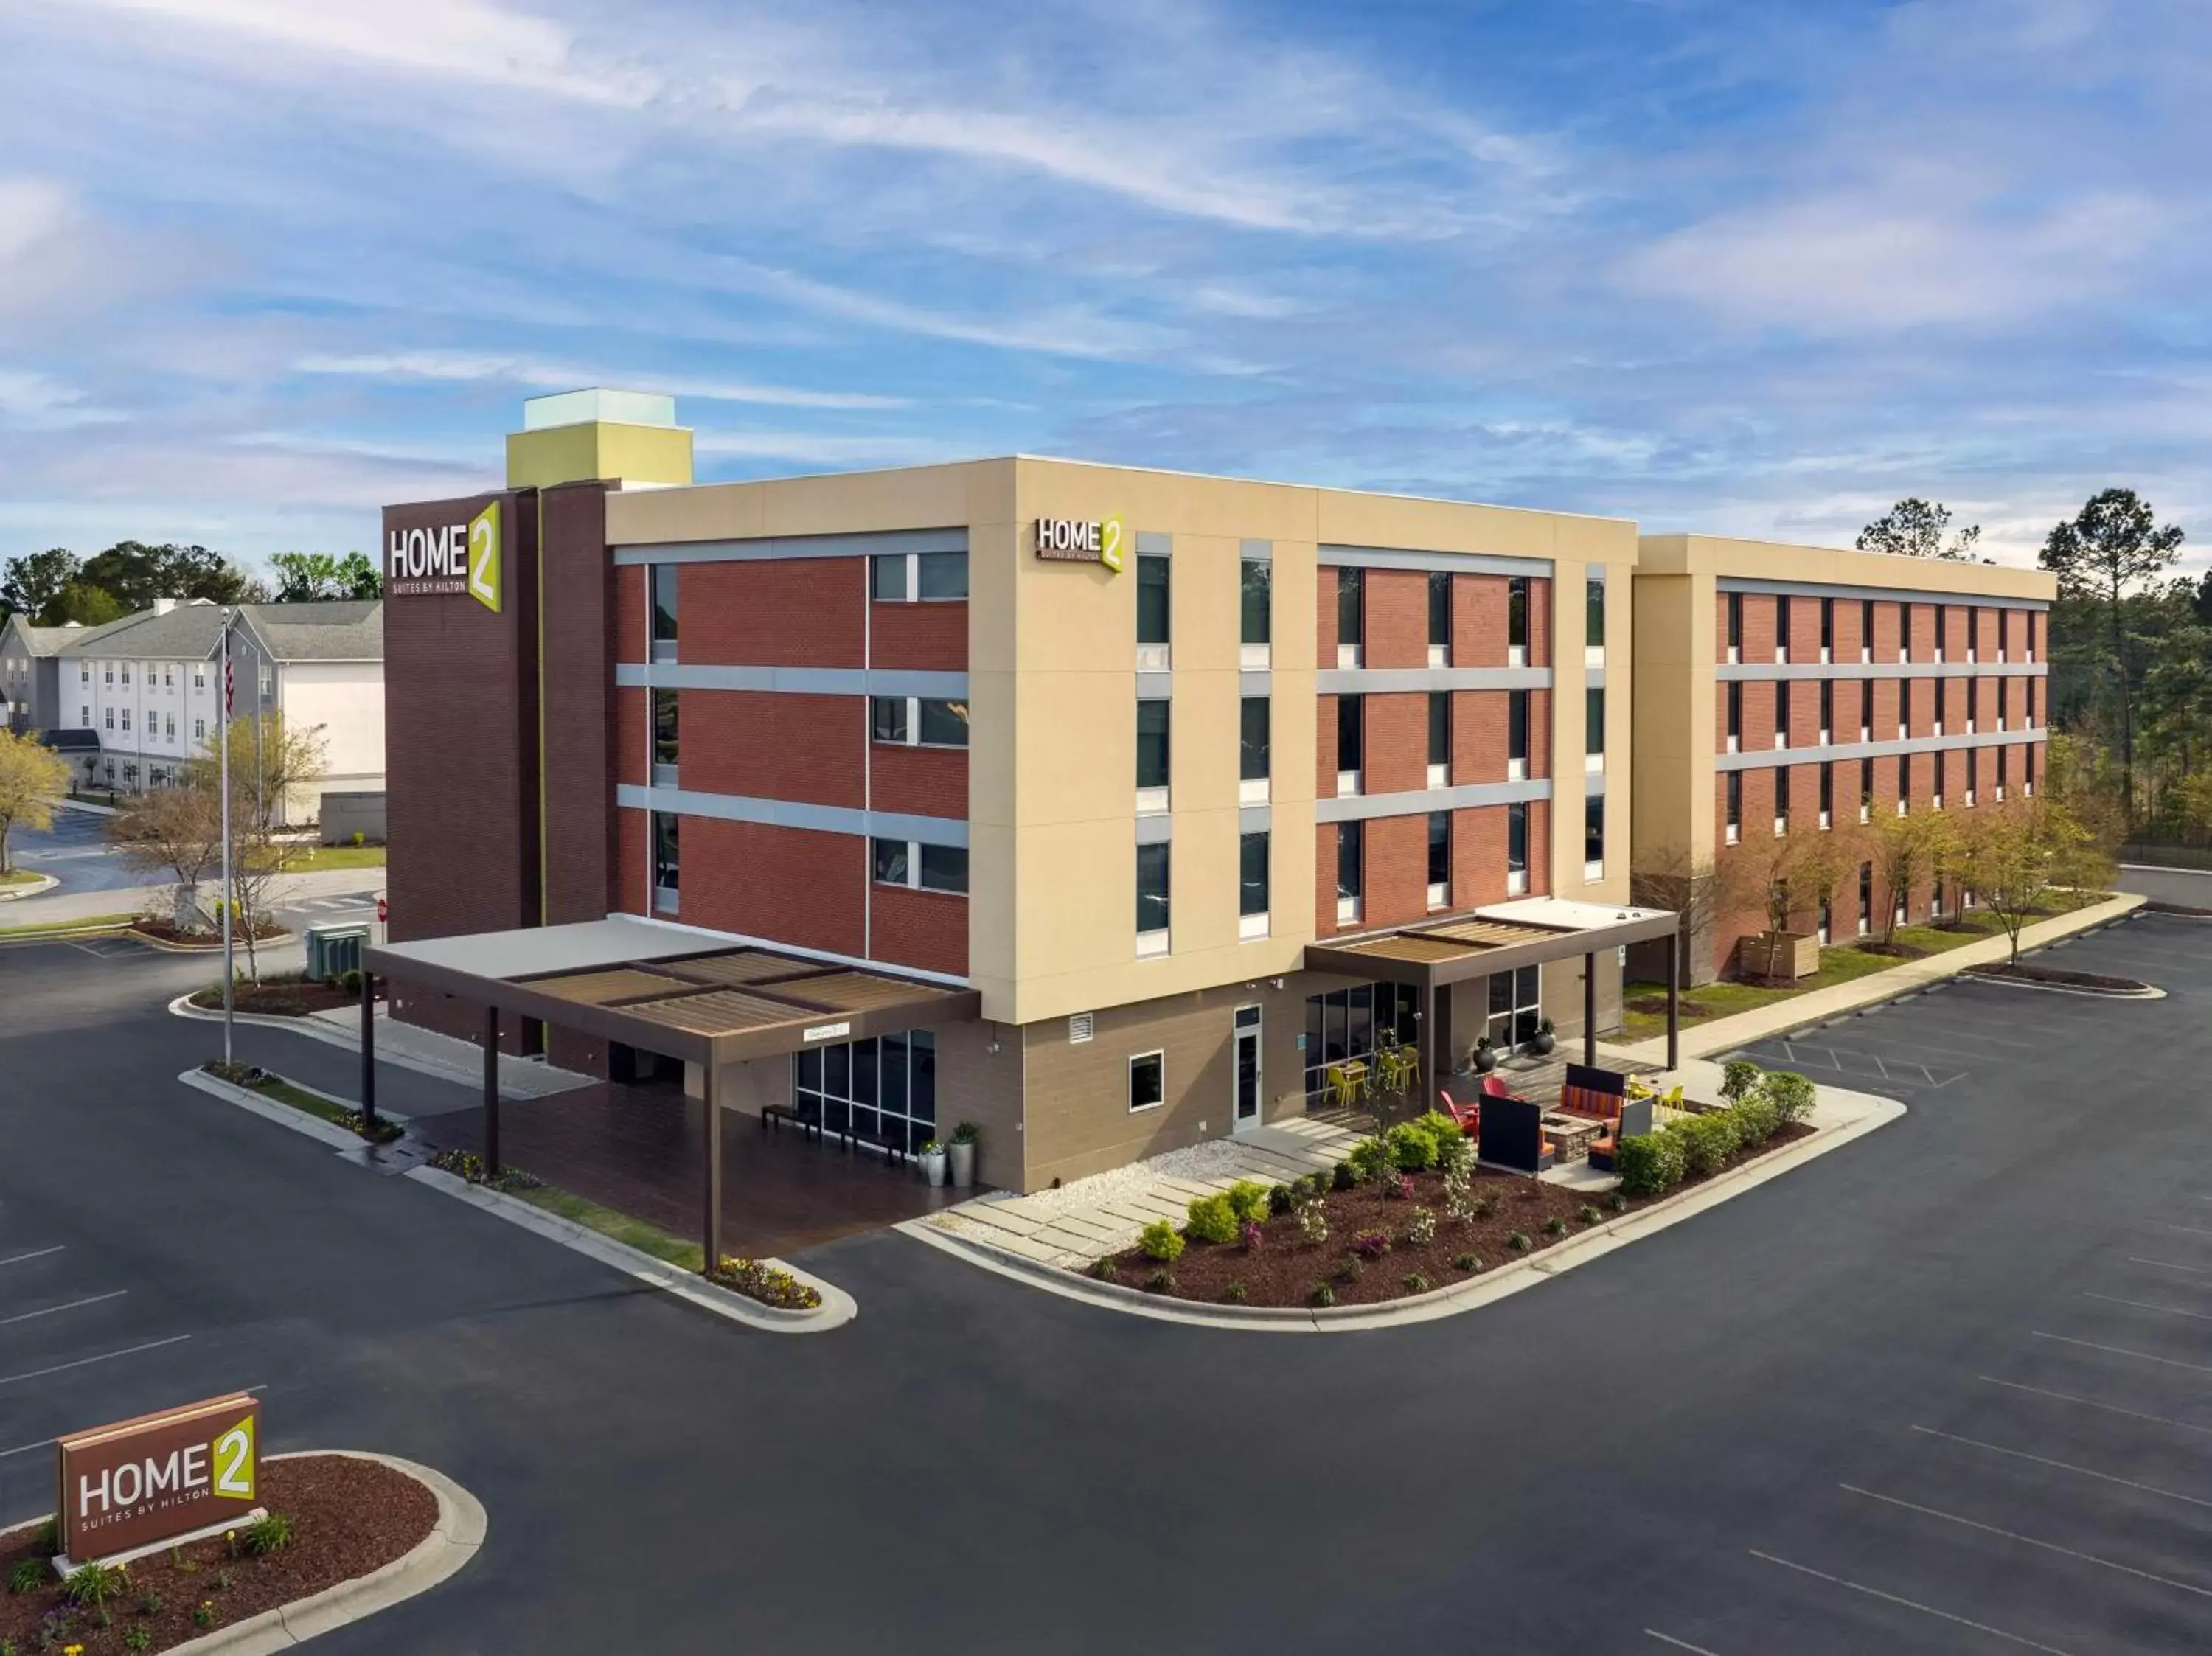 Property Building in Home2 Suites by Hilton Jacksonville, NC